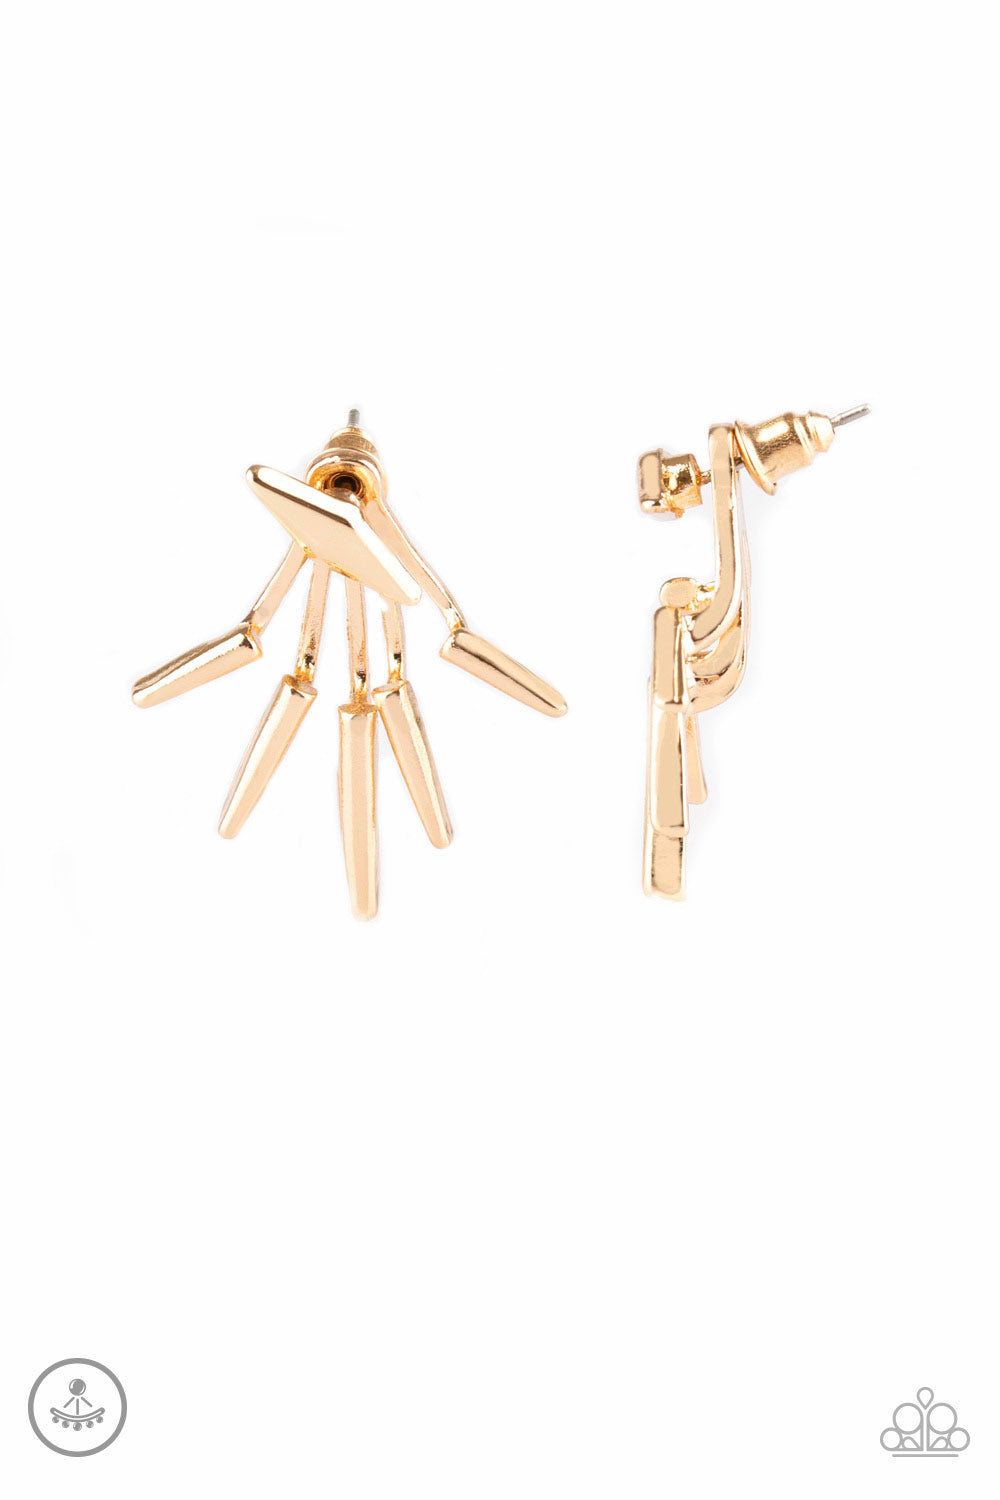 EXTRA ELECTRIC - GOLD POST EARRING